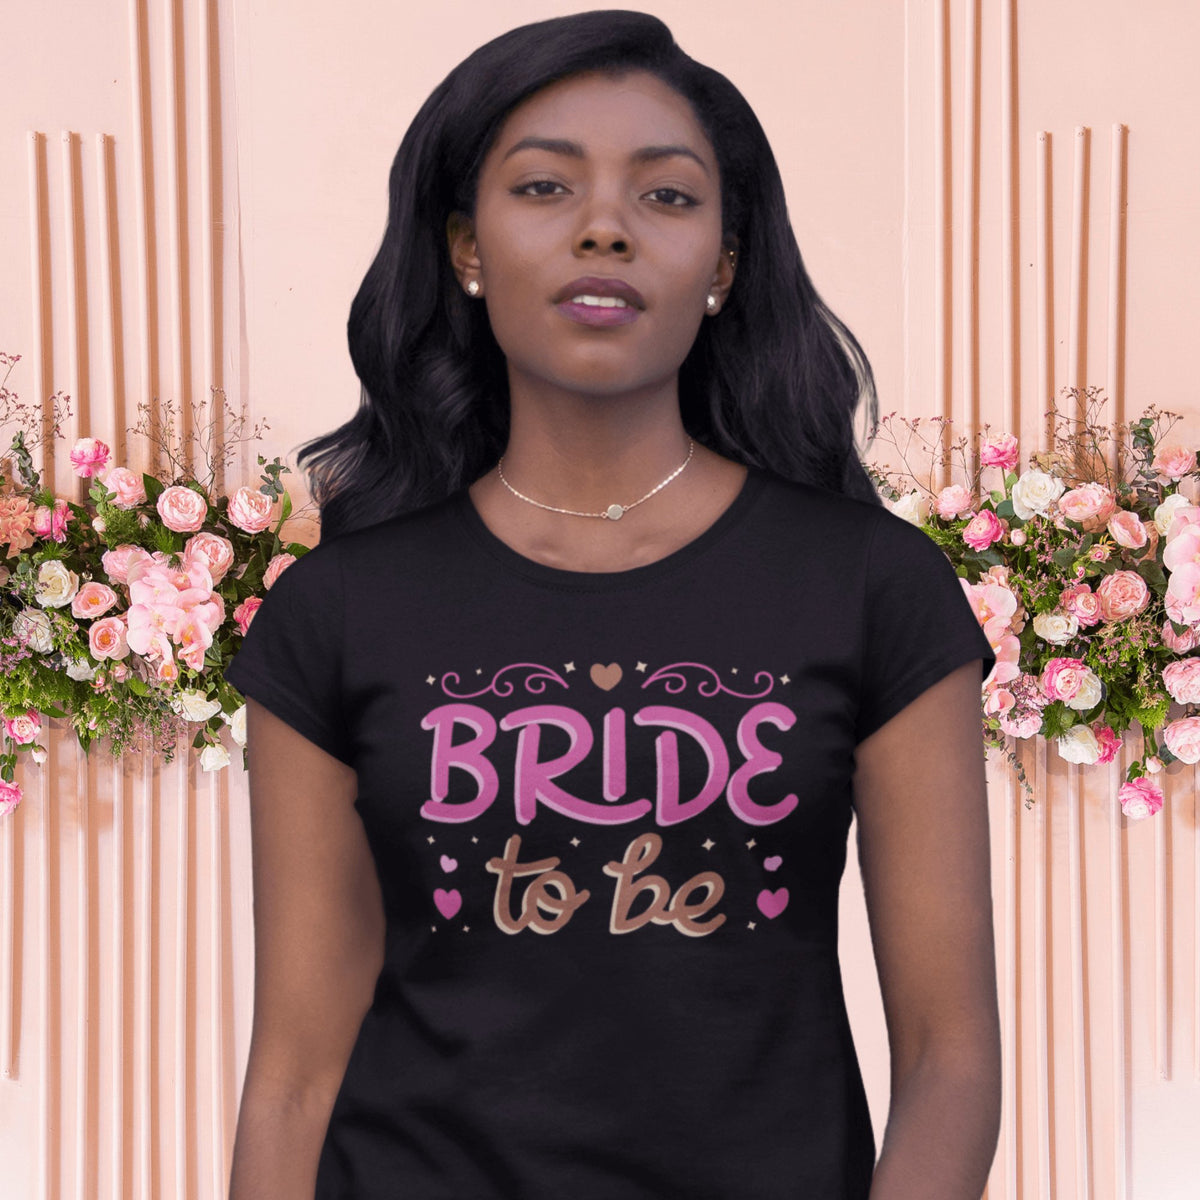 Bride To Be T-Shirt For The Bride - Eventwisecreations